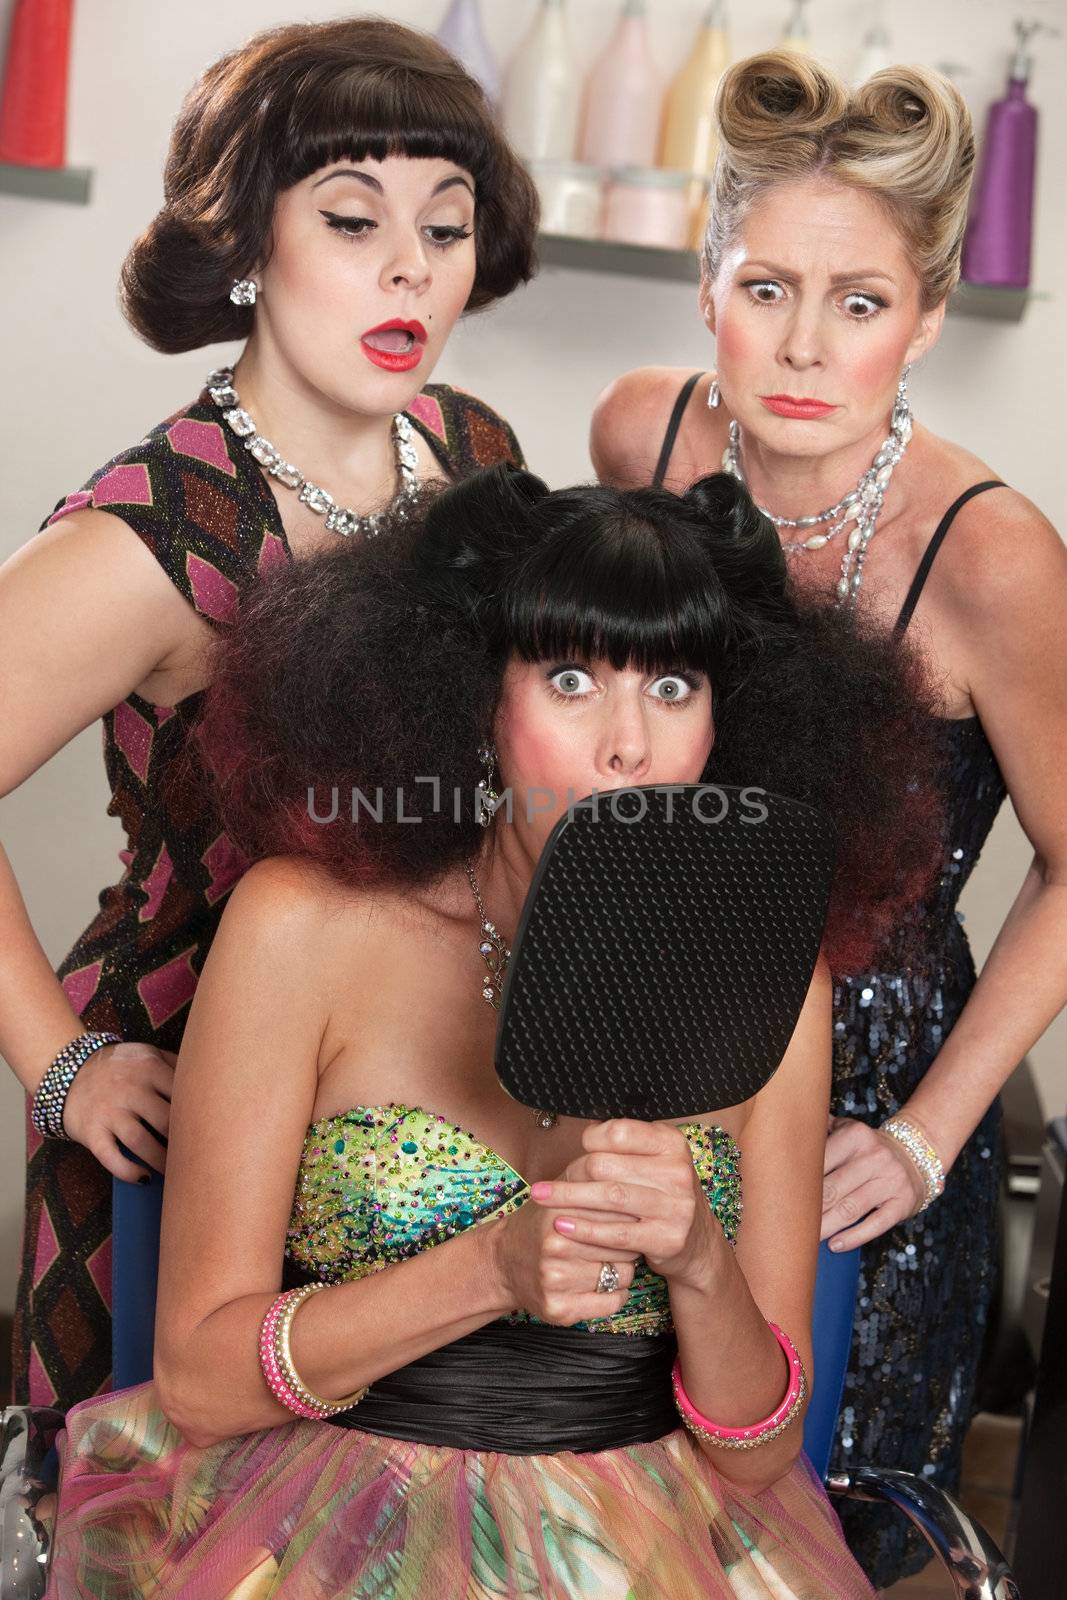 Shocked woman behind mirror with curious ladies in hair salon